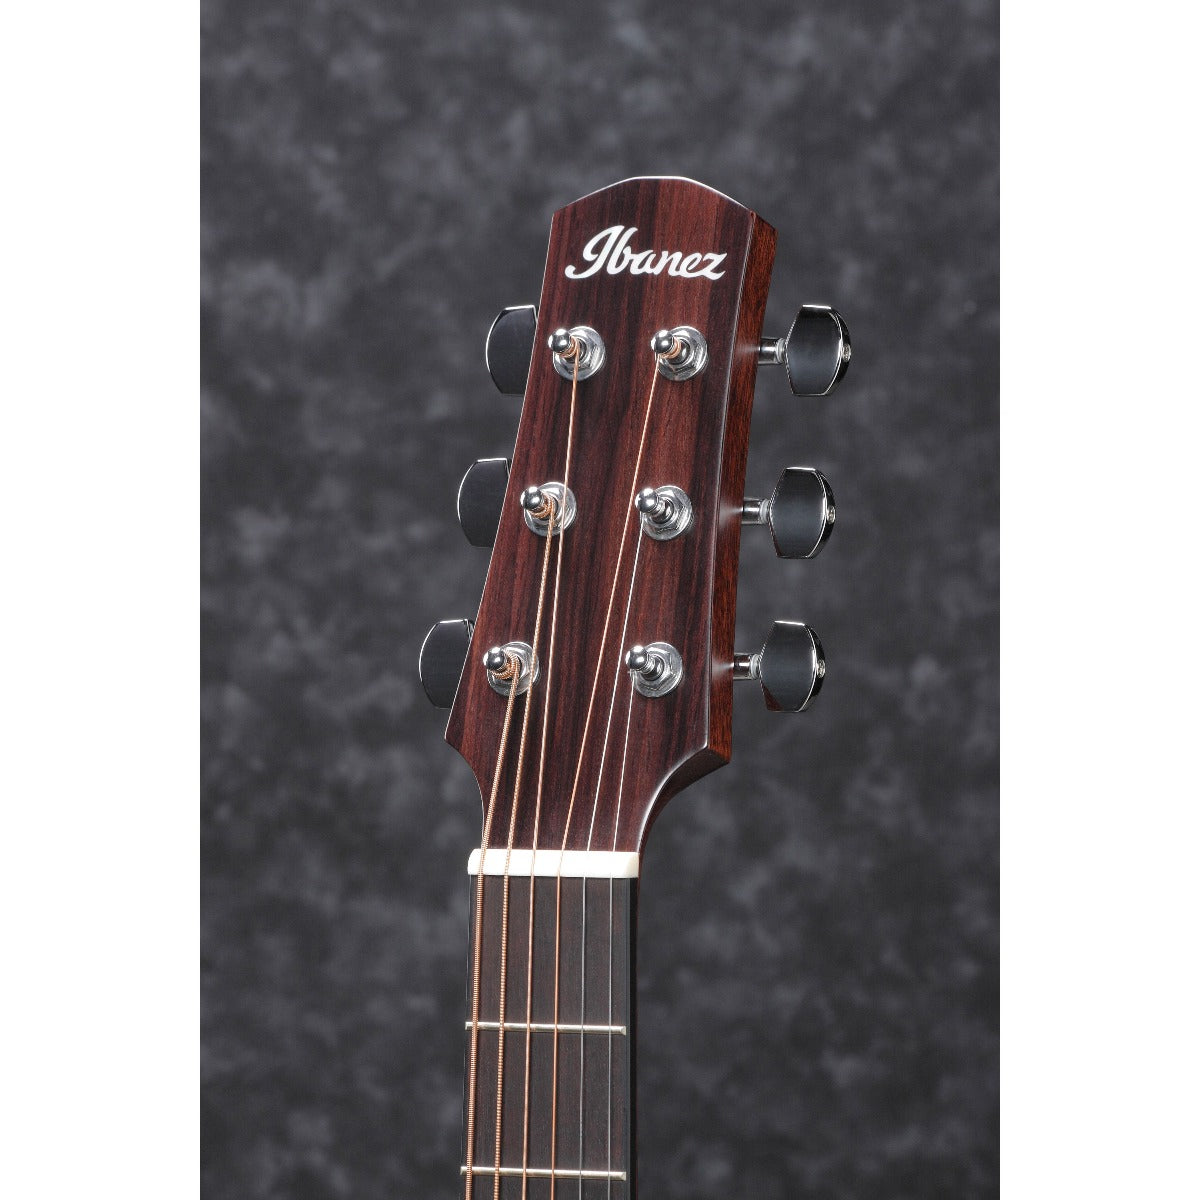 Detail view of Ibanez AAD100E Acoustic-Electric Guitar - Open Pore Natural showing headstock top